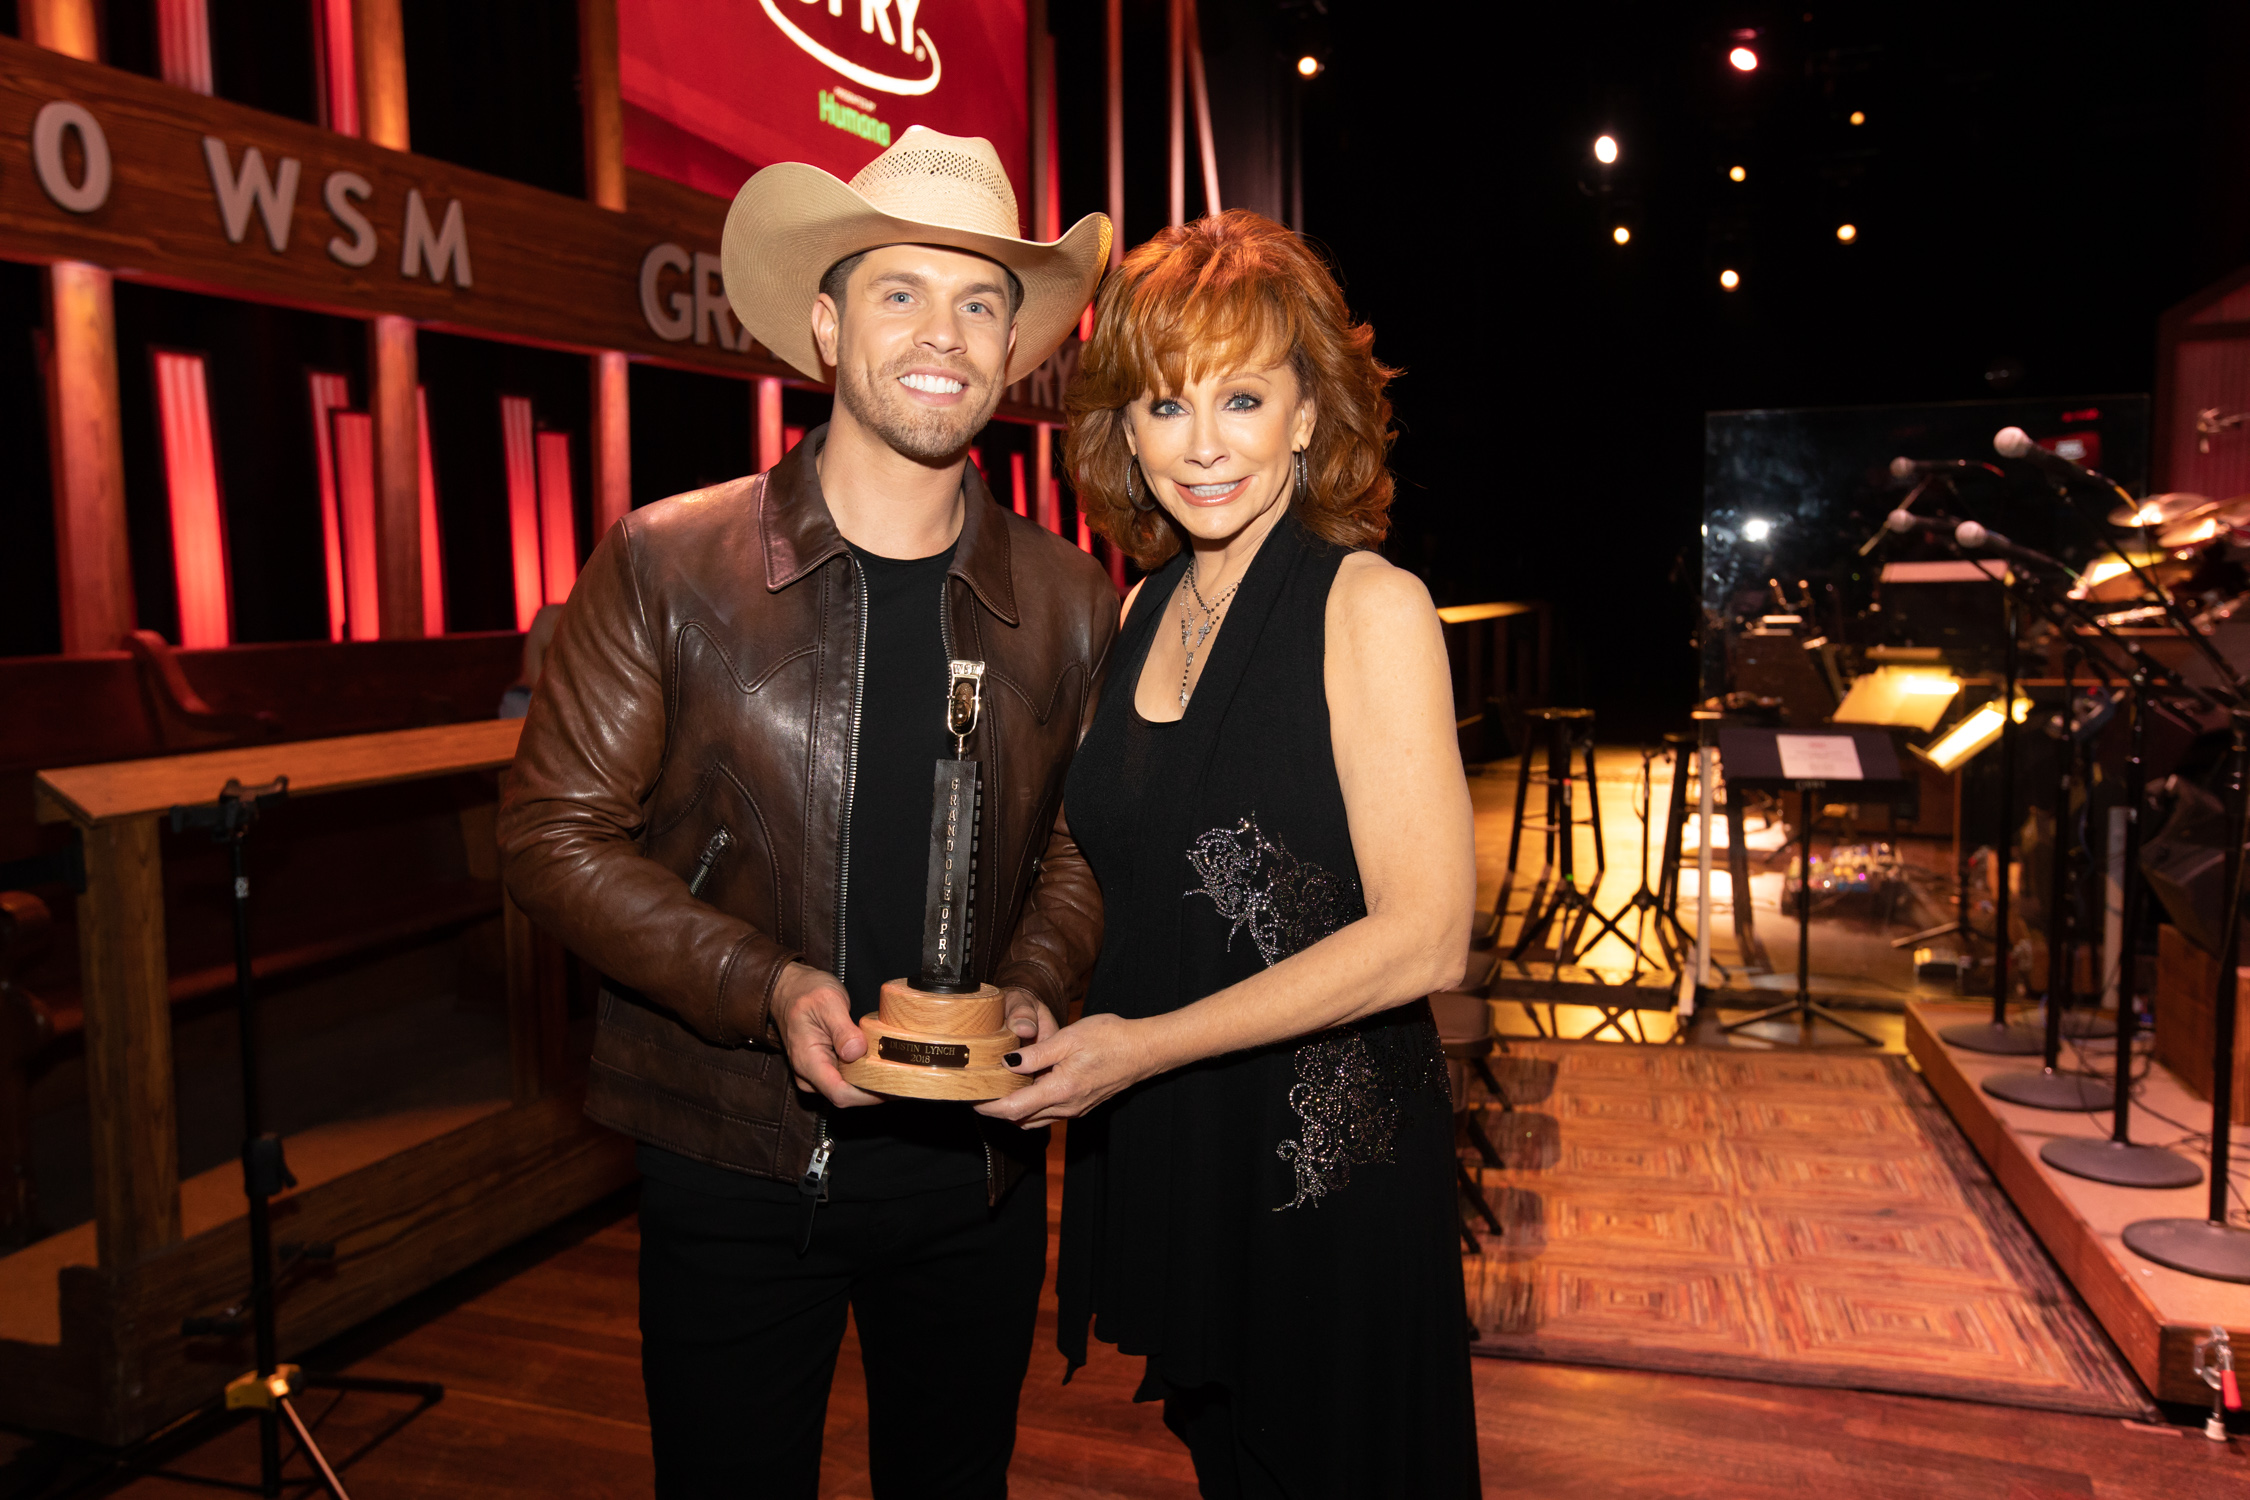 Dustin Lynch Gets Inducted as a Member of the Grand Ole Opry by Reba McEntire